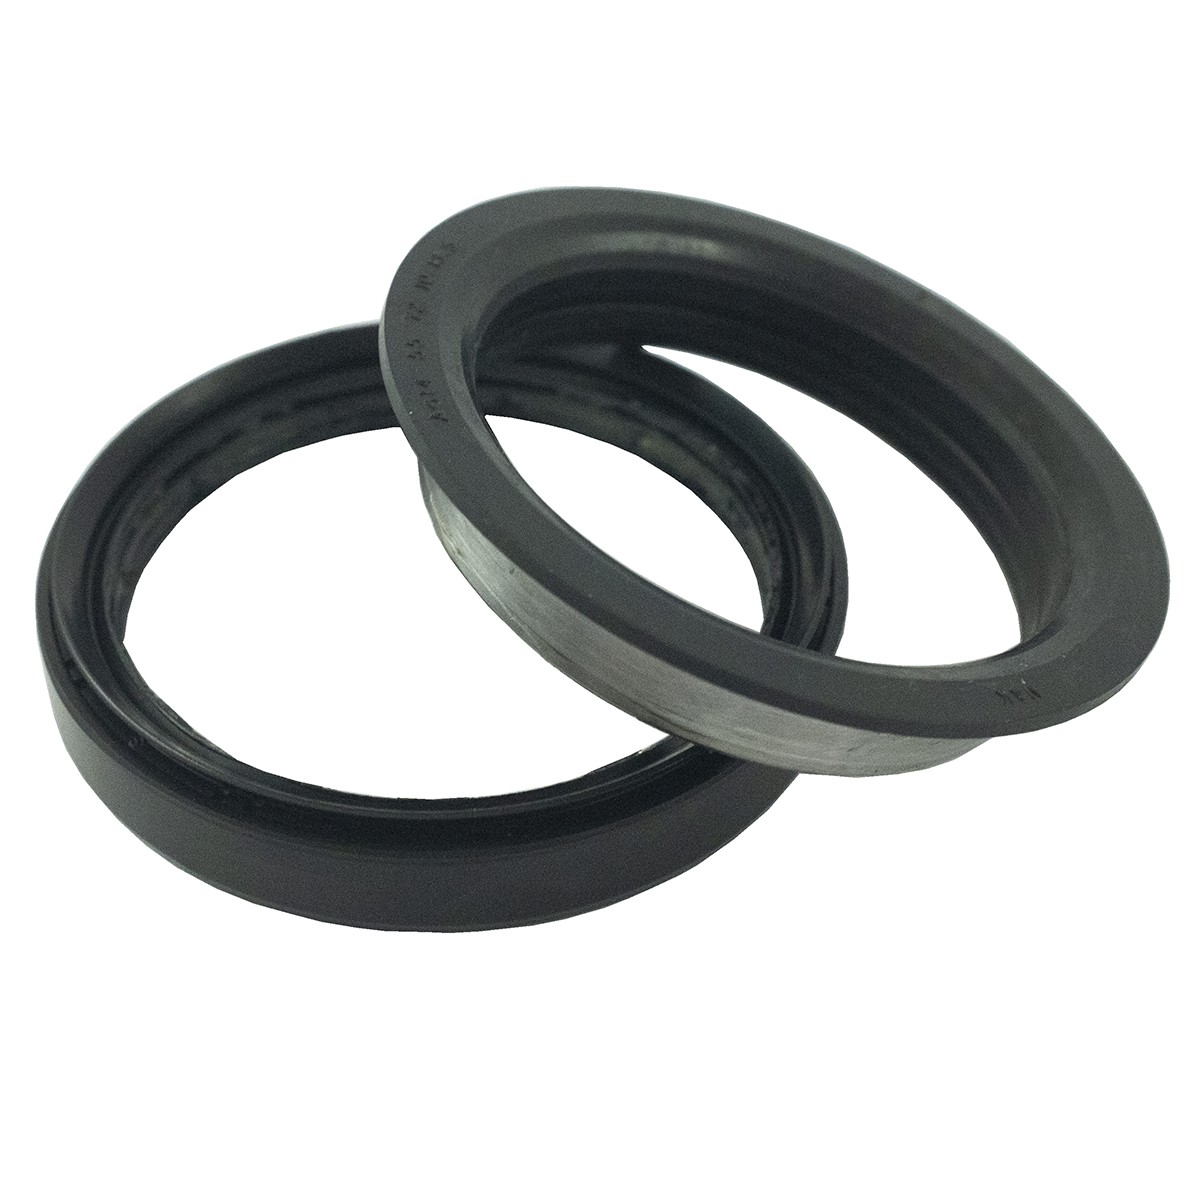 Cassette seal 55 x 72 x 13.50 / 10 mm / TRG400 / 40194978